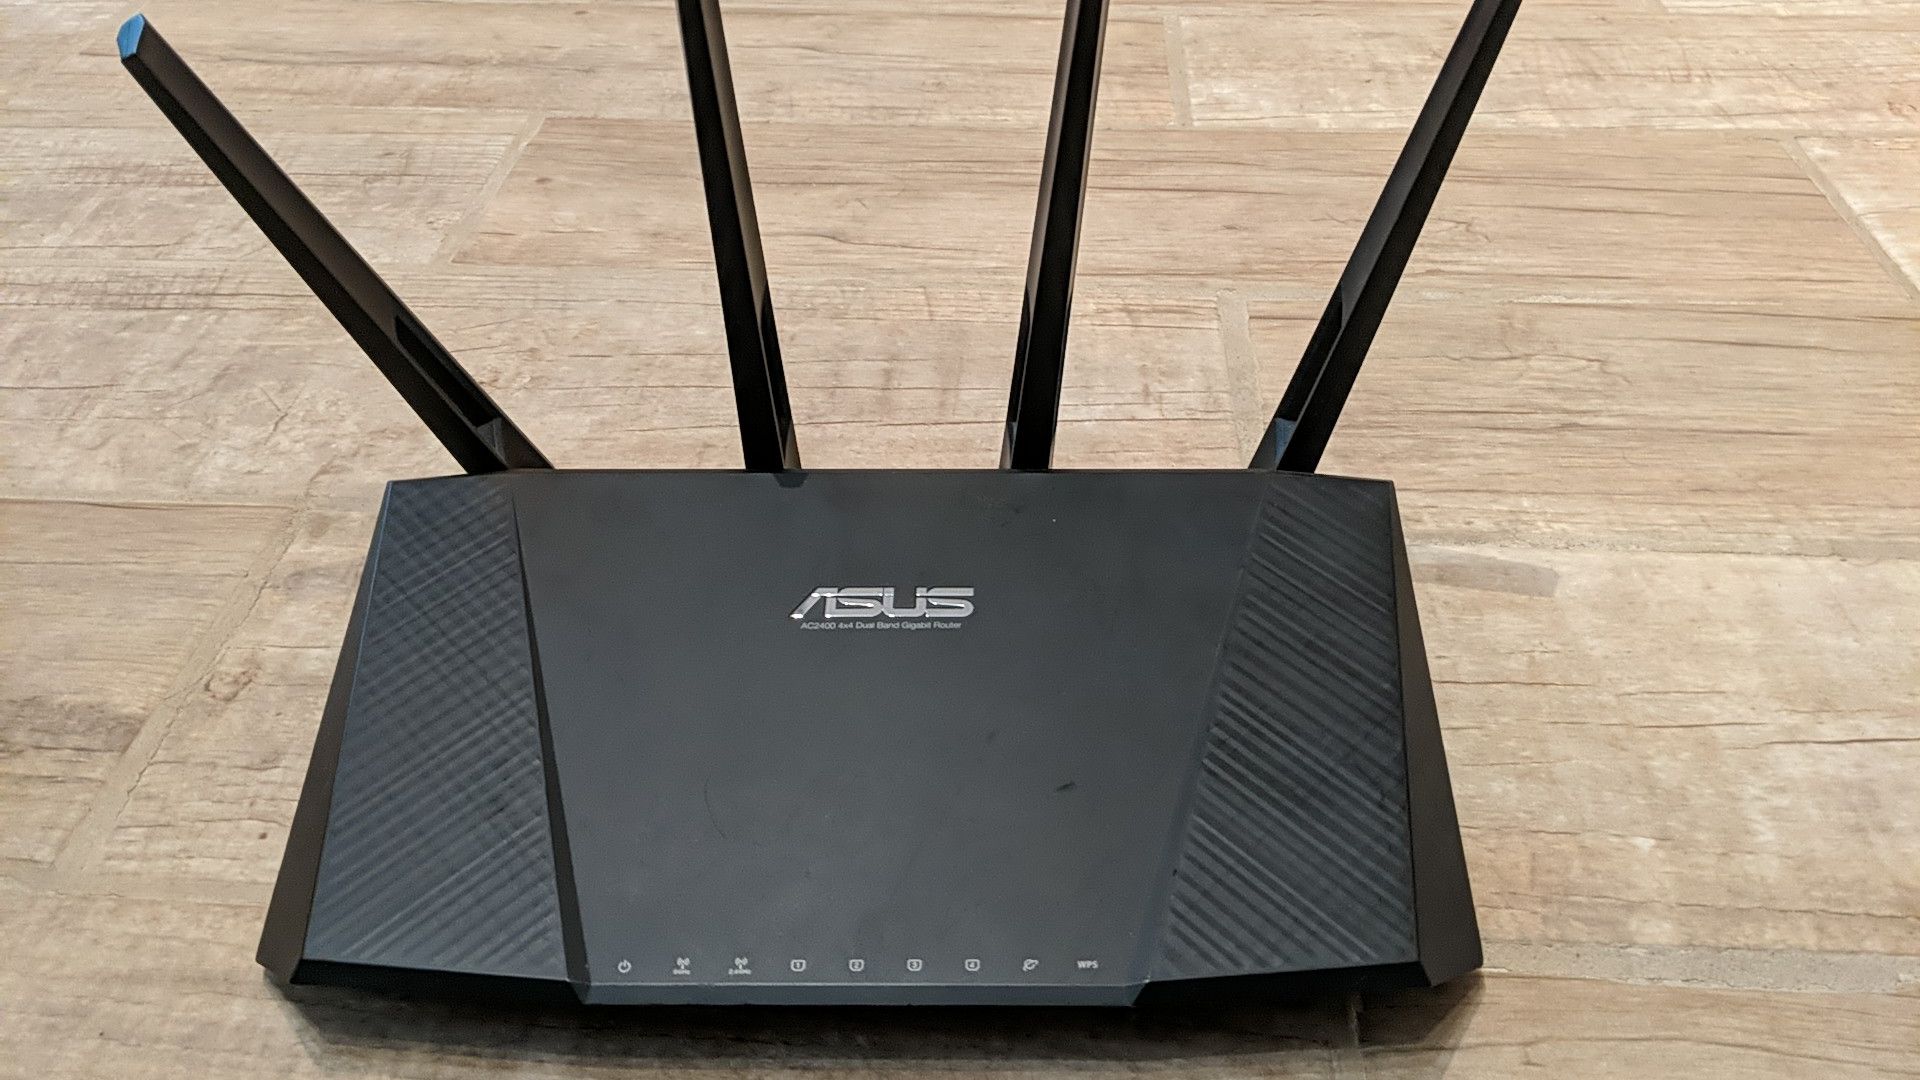 Asus RT-AC87U Wifi Router